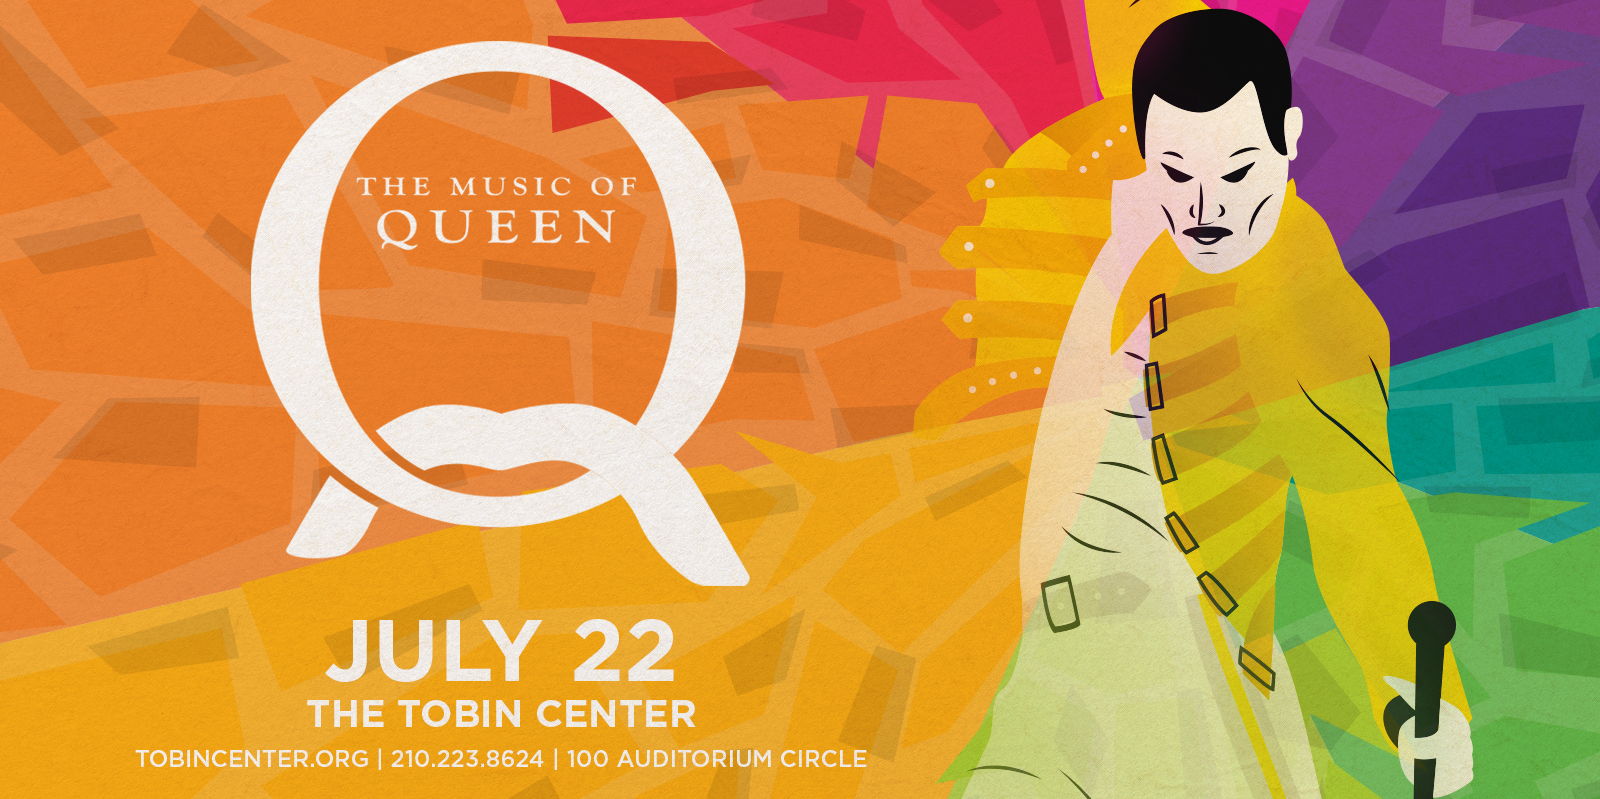 Q: The Music Of Queen promotional image